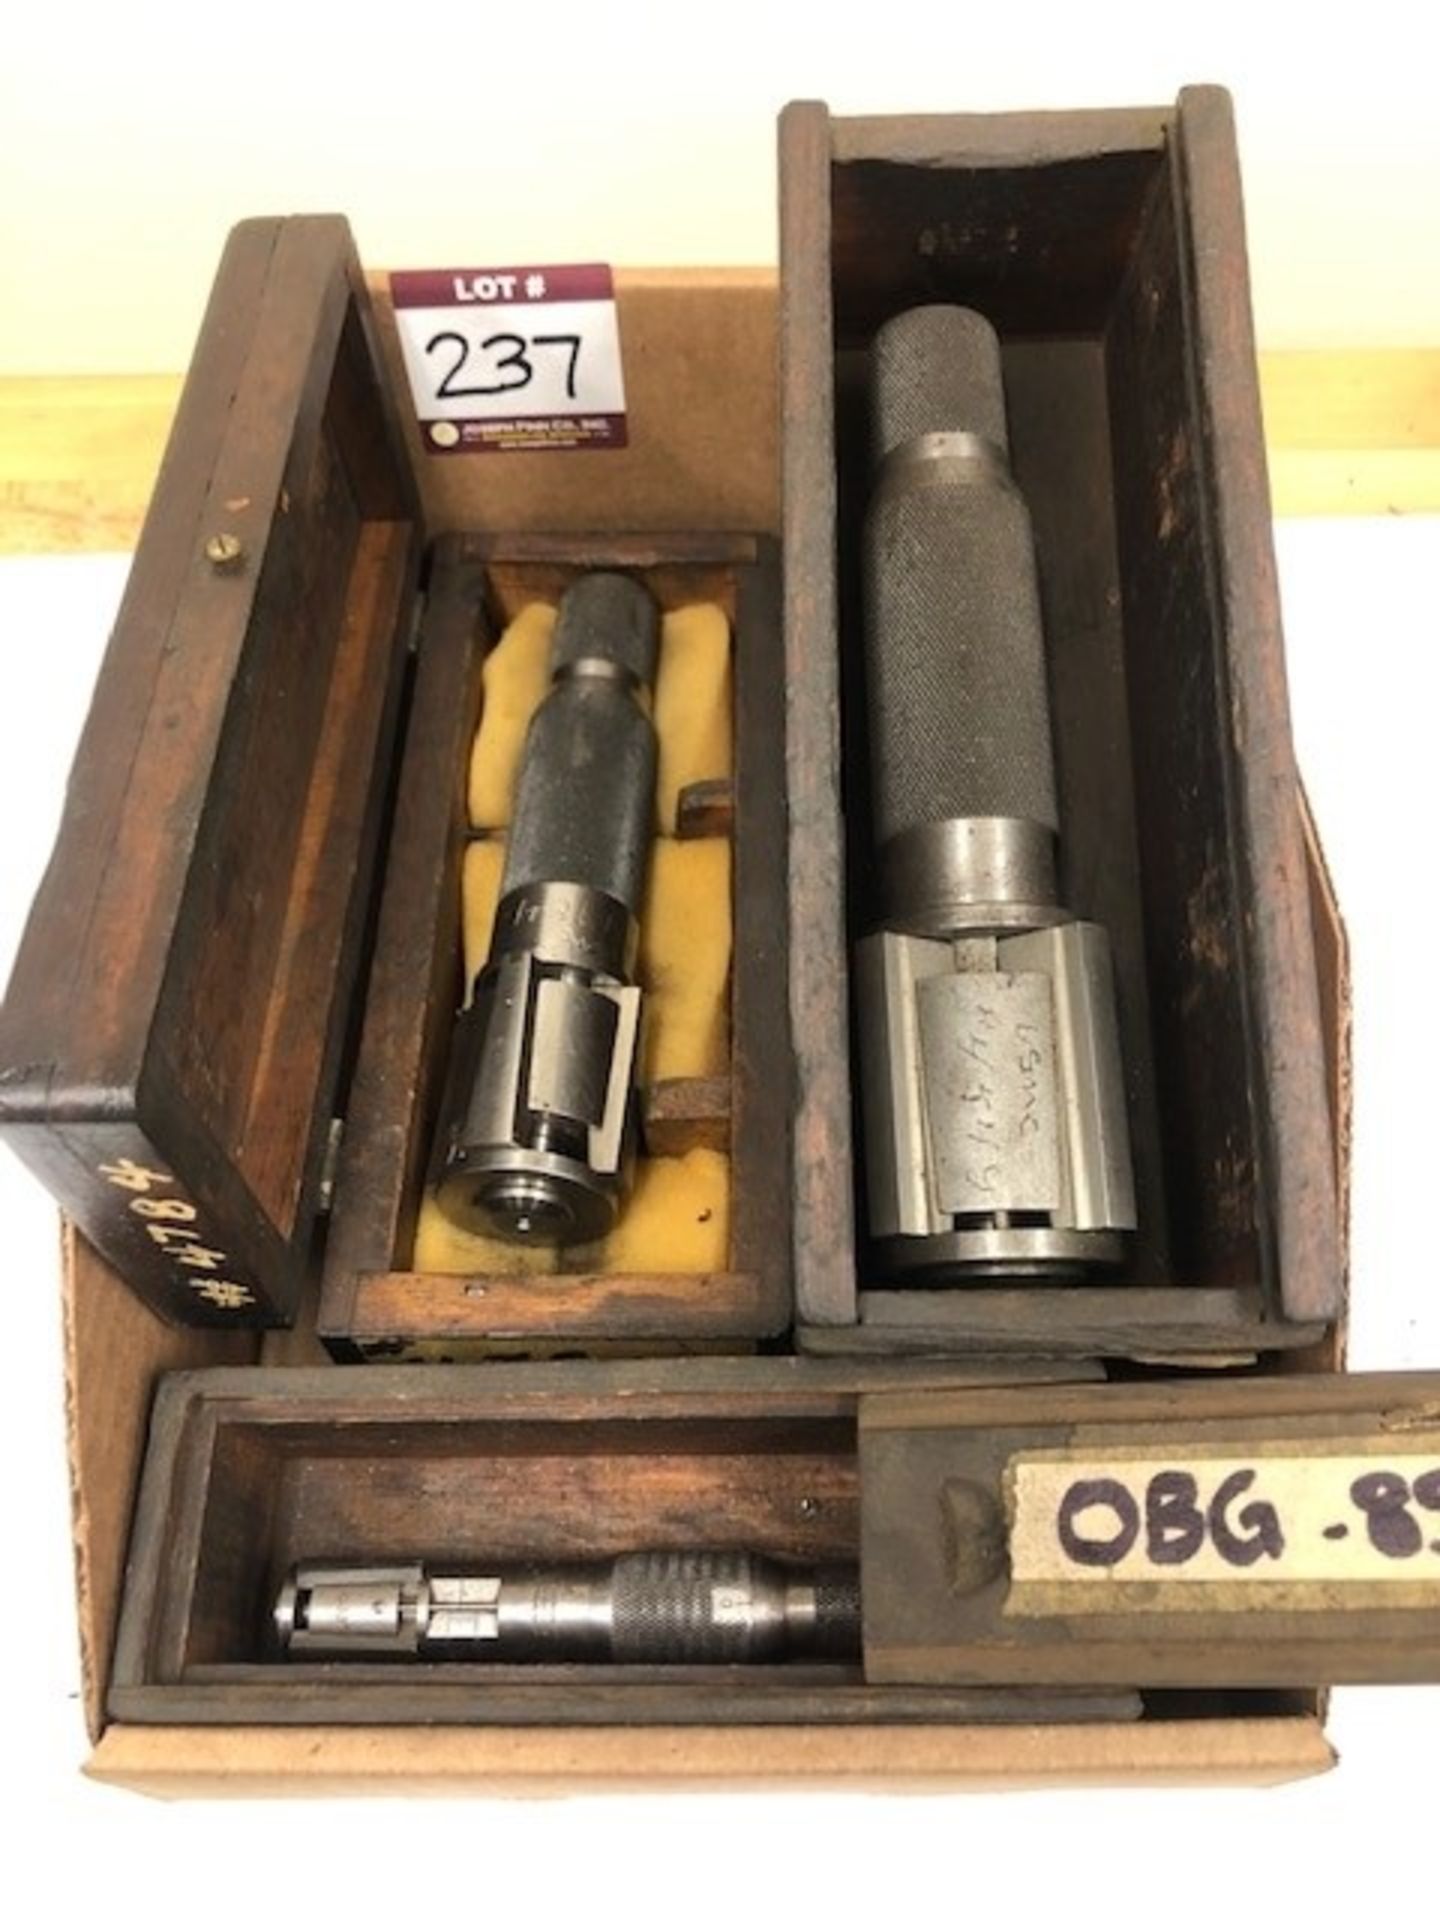 (3) Quad Mic Bore Gages w/Boxes - .850-.910 1.600-1.700 2.220-2.350 - Image 2 of 2